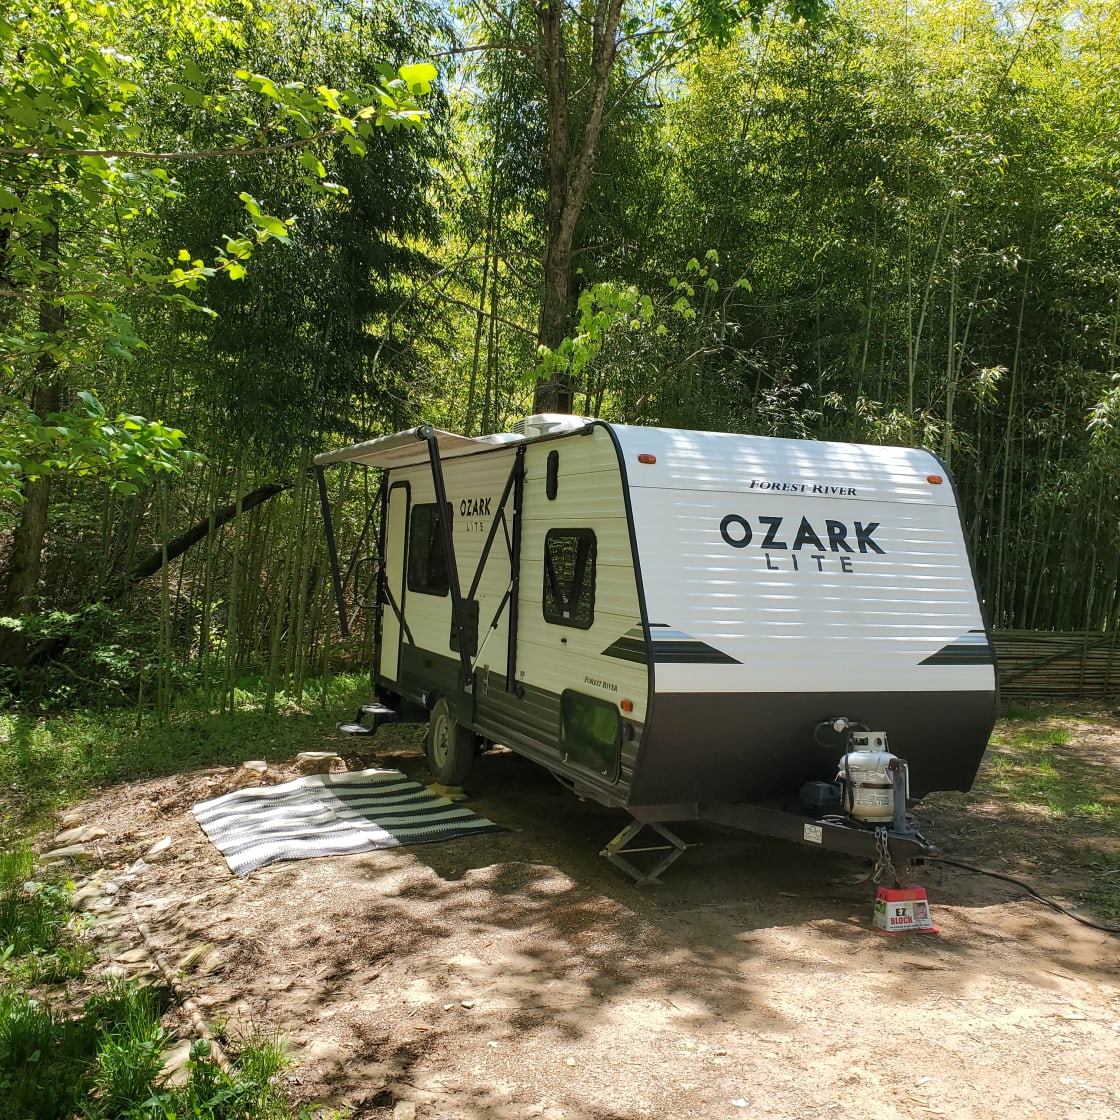 Camp in front of the creek.
Park your vehicle next to trailer.